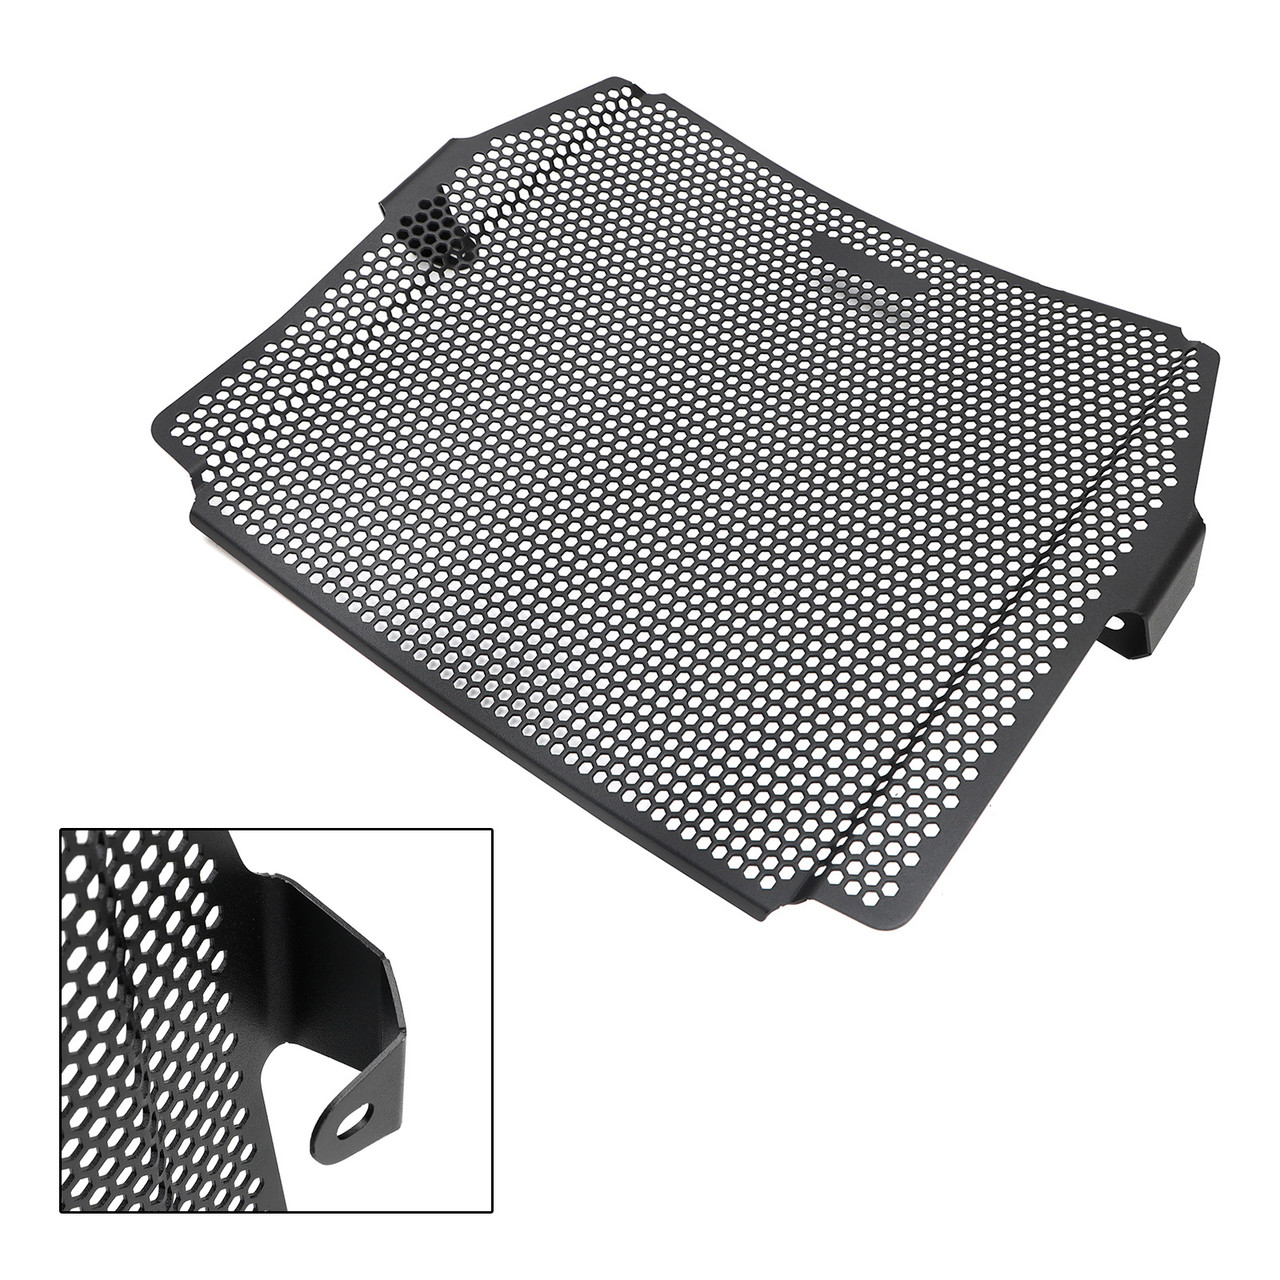 Radiator Guard Protector Radiator Cover Fits For Triumph Street Triple 765 Rs 23